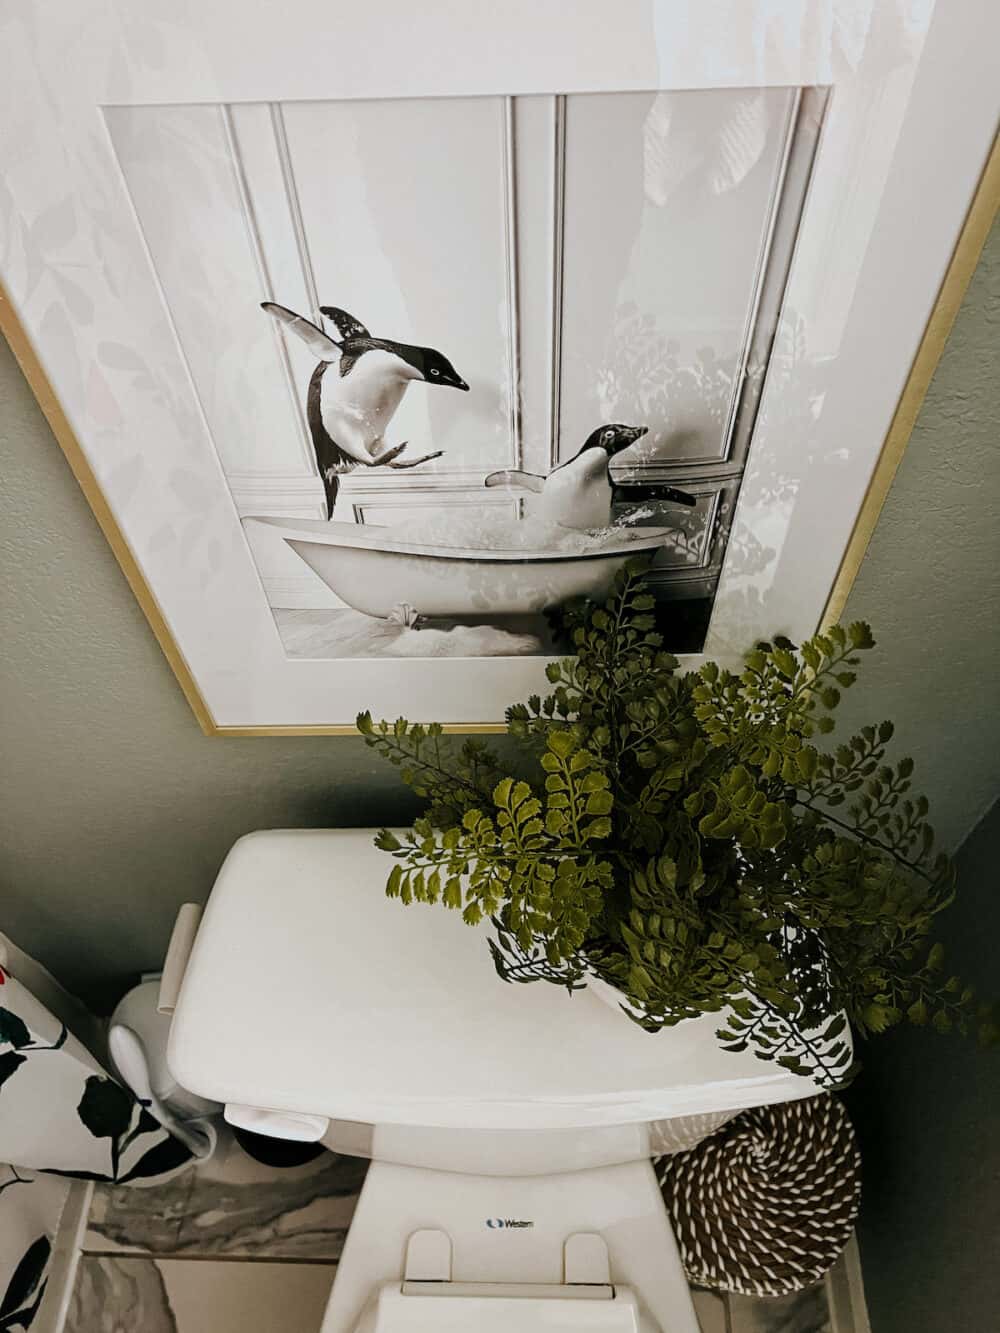 Overhead shot of a toilet with art above it and a faux plant